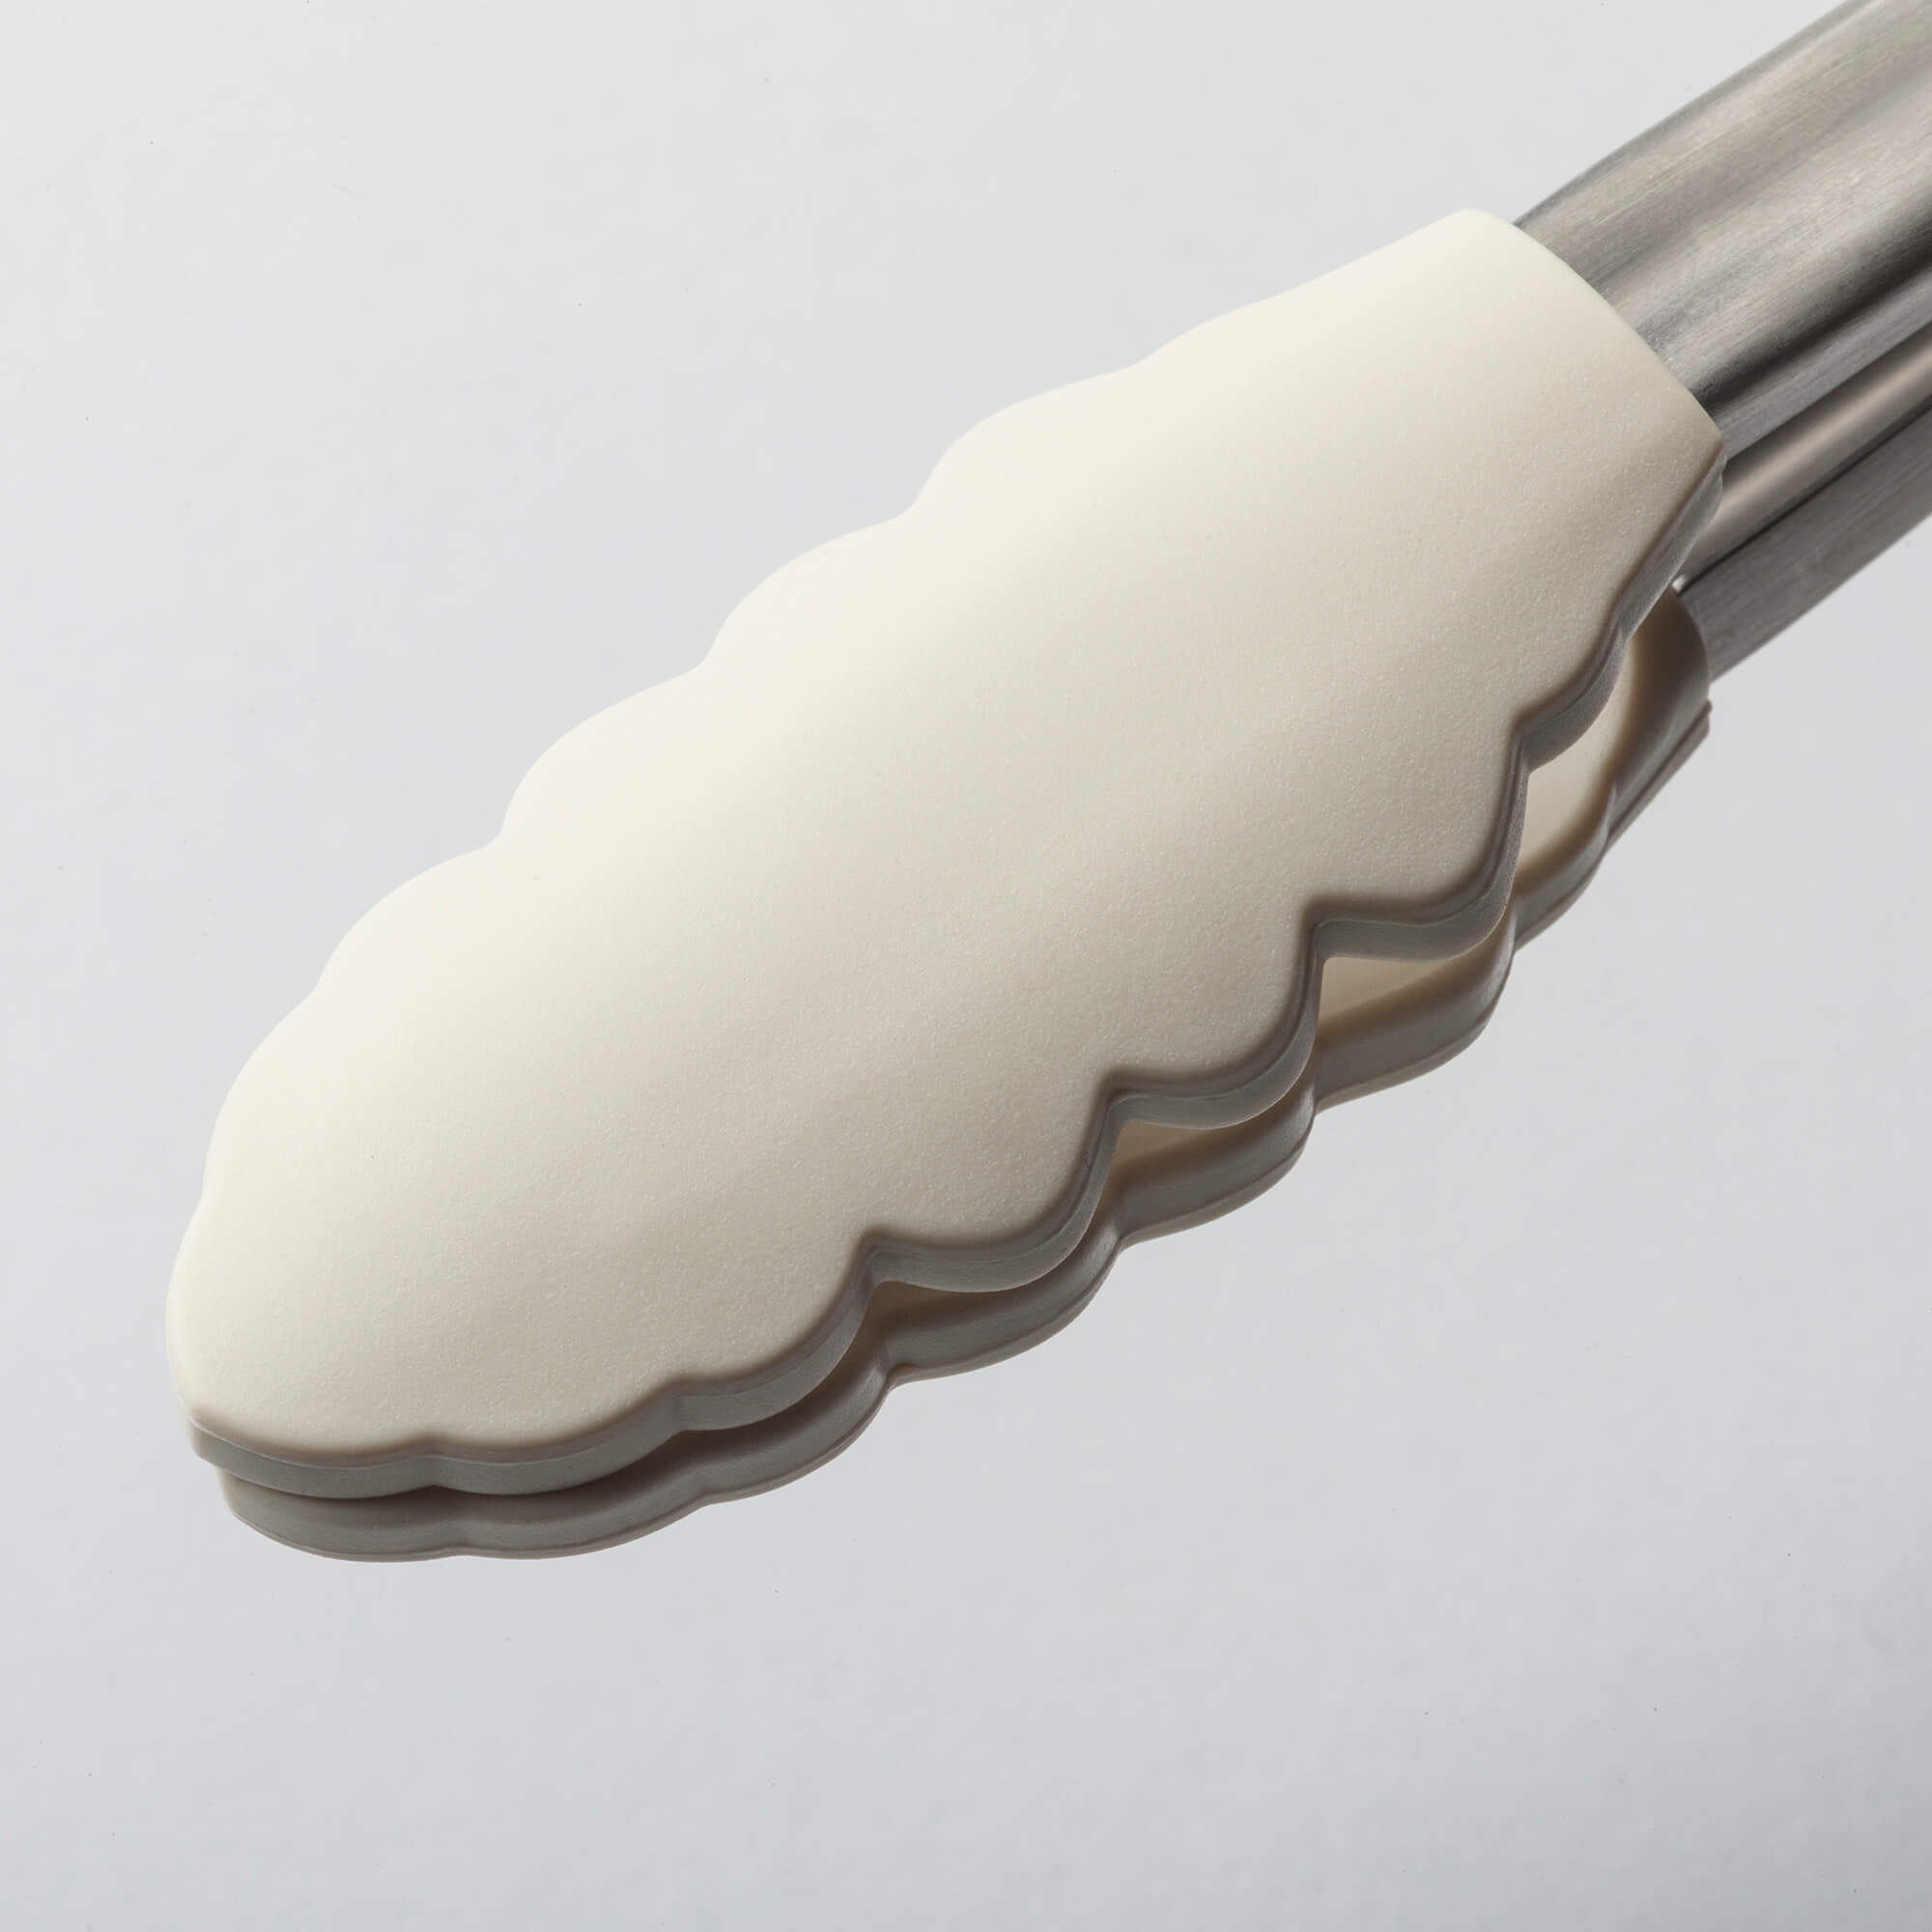 Zeal Silicone Cook’s Tong head detail